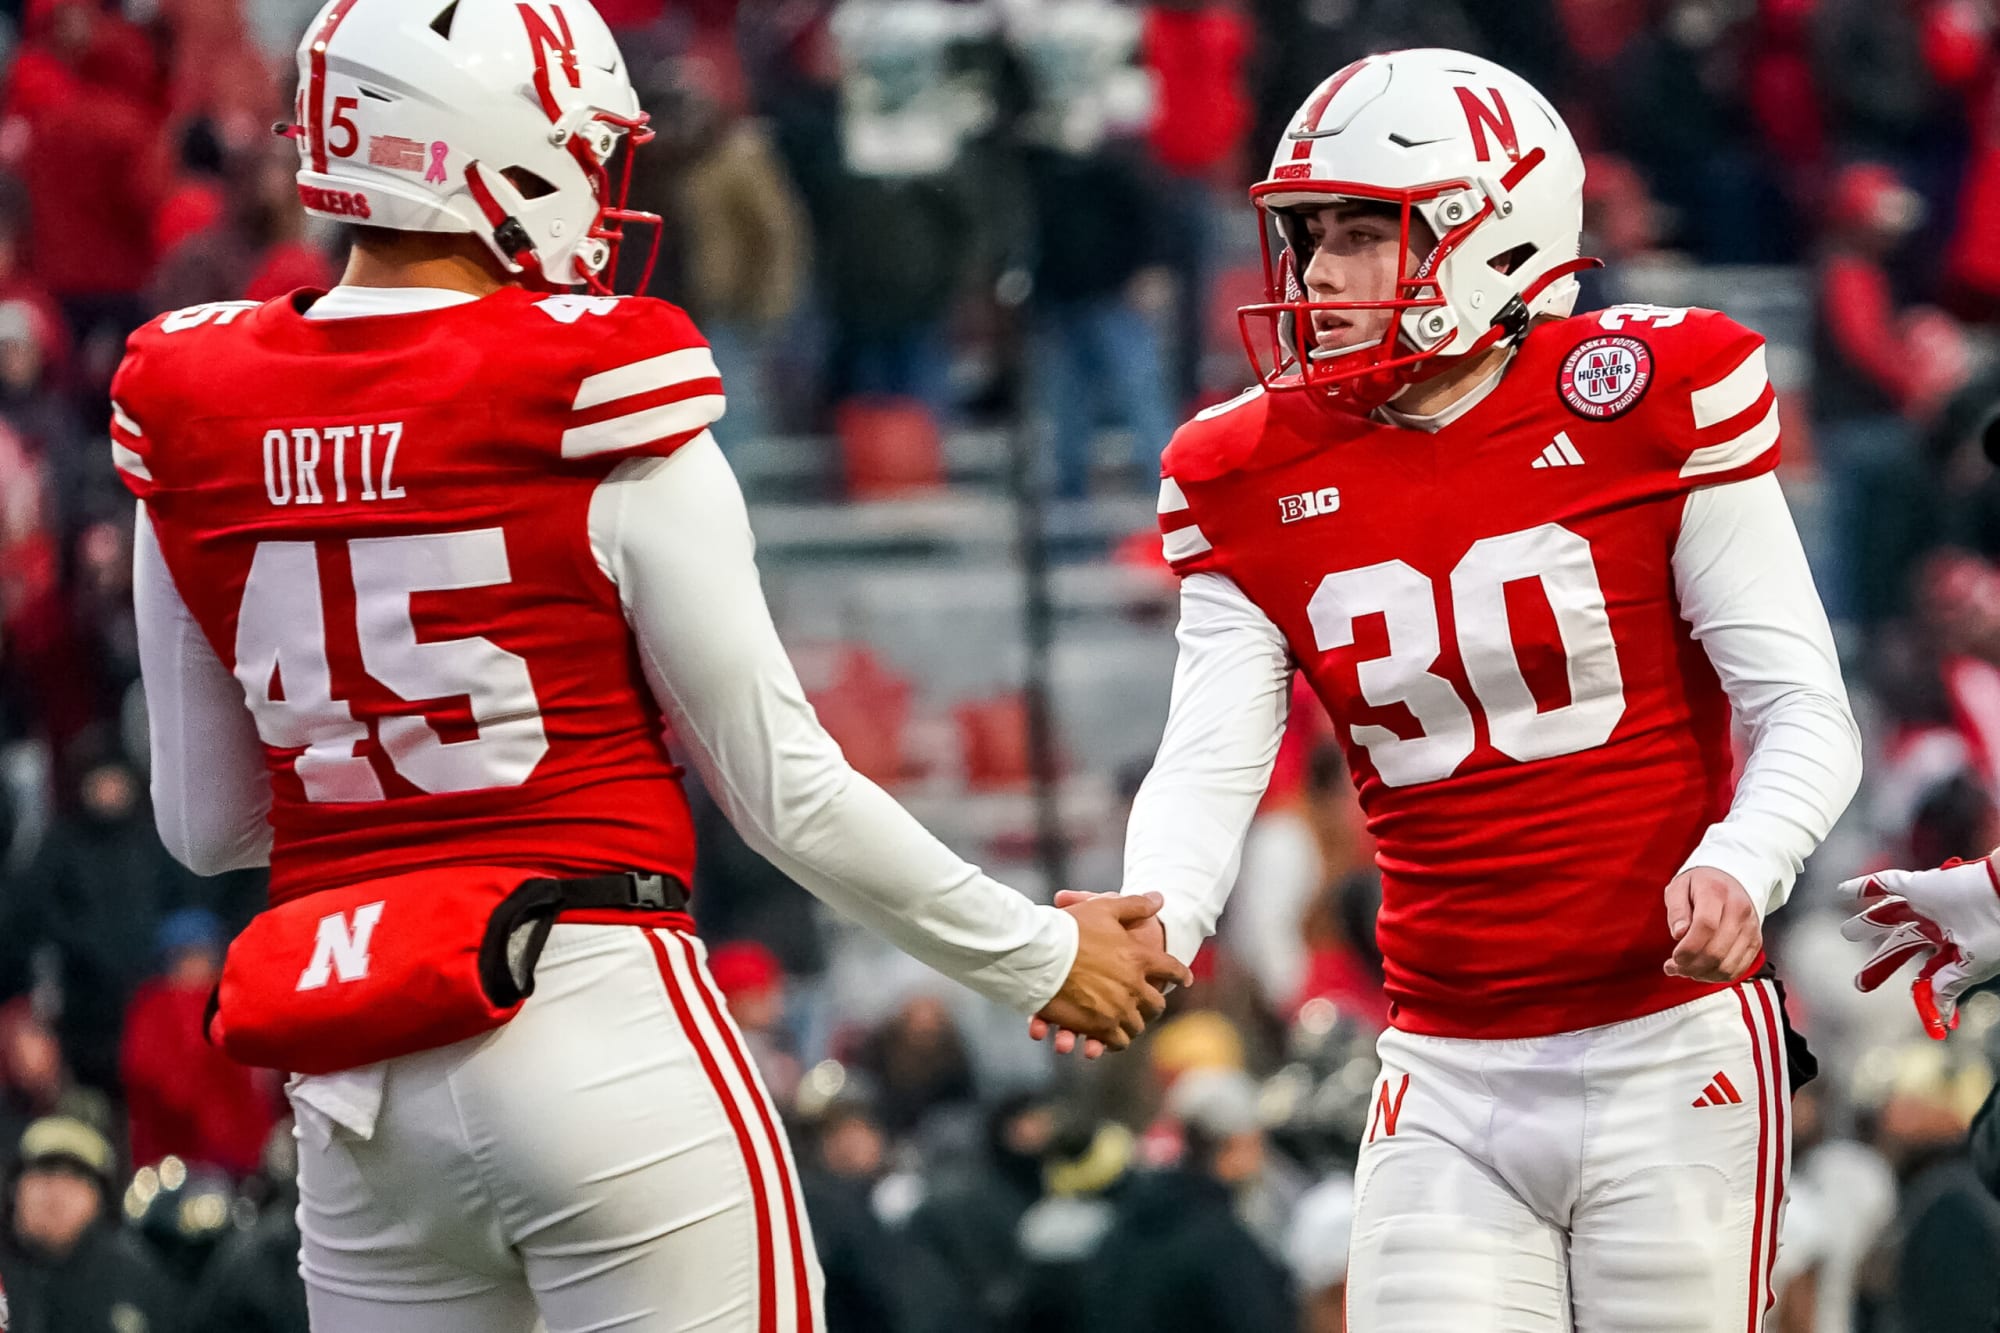 Nebraska Football has a better chance to win the B1G West than you